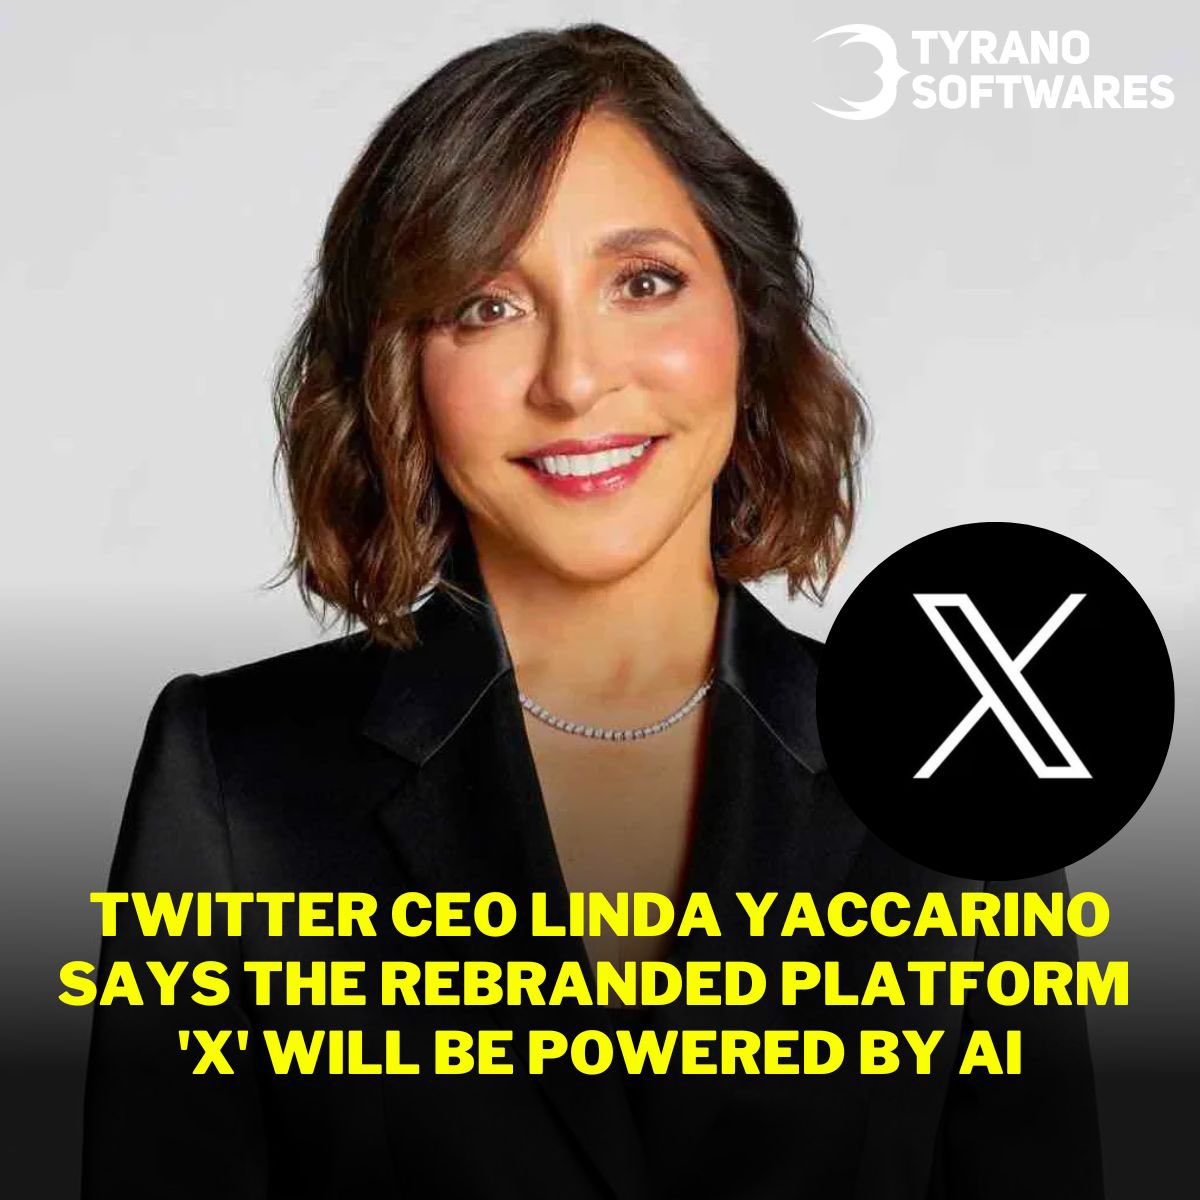 Linda tweeted that X is the next big thing after Twitter, taking communication to a whole new level.

#tyranosoftwares #XNextBigThing #CommunicationEvolution #AIConnectivity #GlobalTownSquare #AudioVideoMessaging #BankingServices #DigitalInnovation #PlatformForEverything